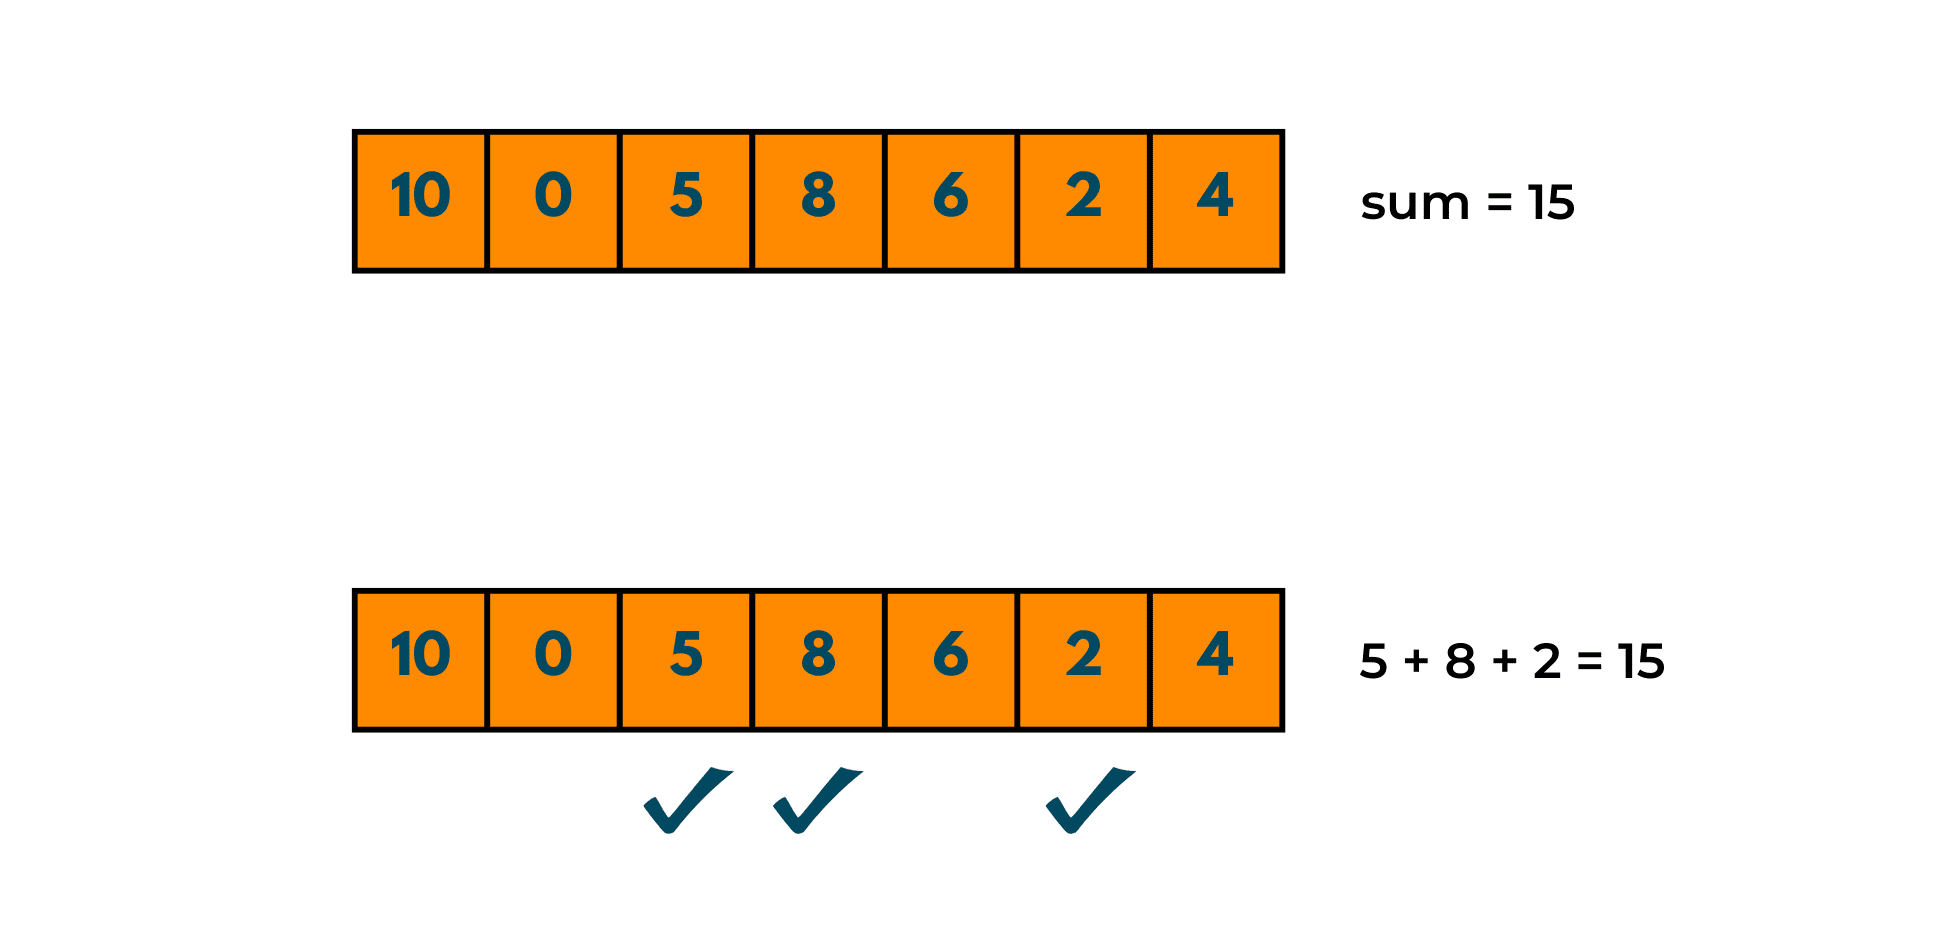 subset sum problem example 